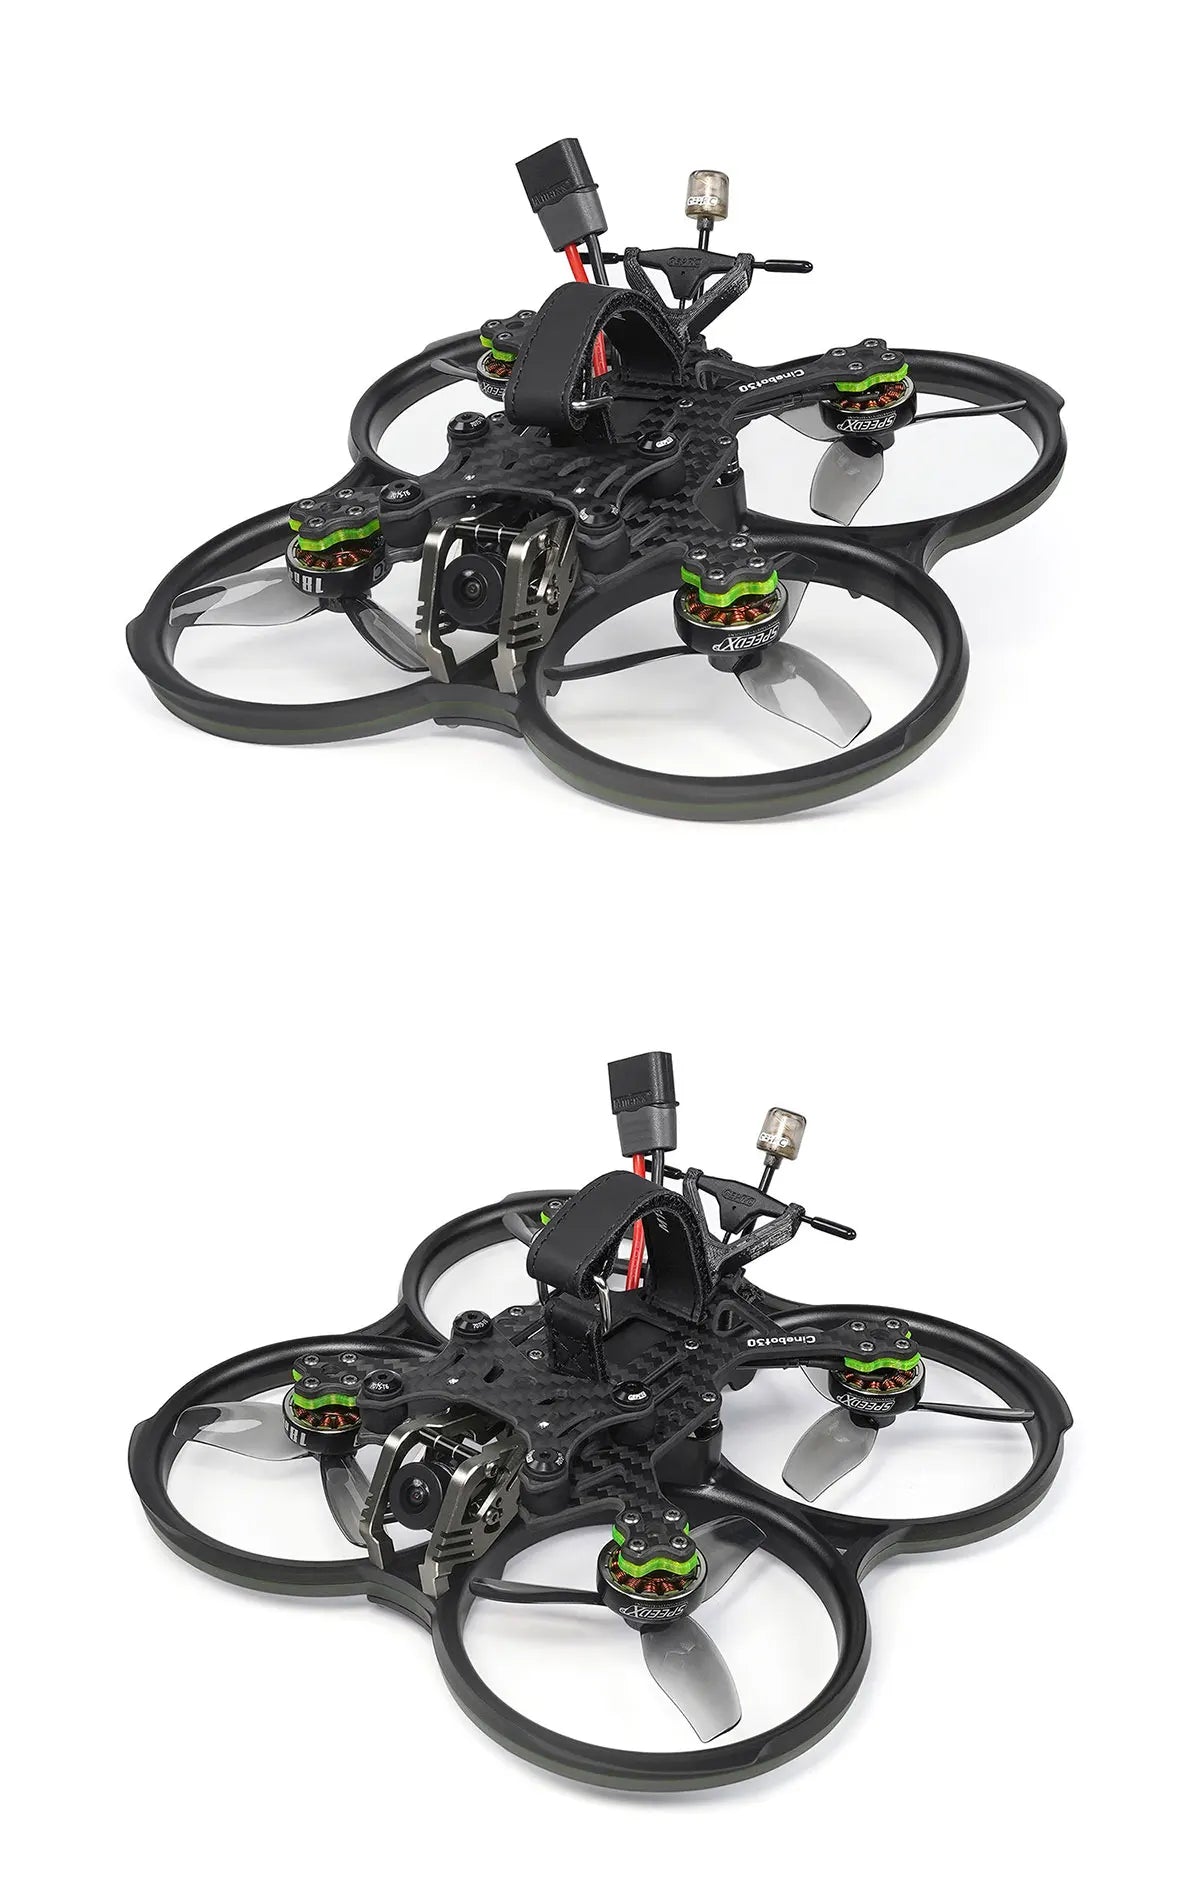 GEPRC Cinebot30 FPV Drone, the Cinebot30 FPV Drone is built with high-quality components to ensure durability